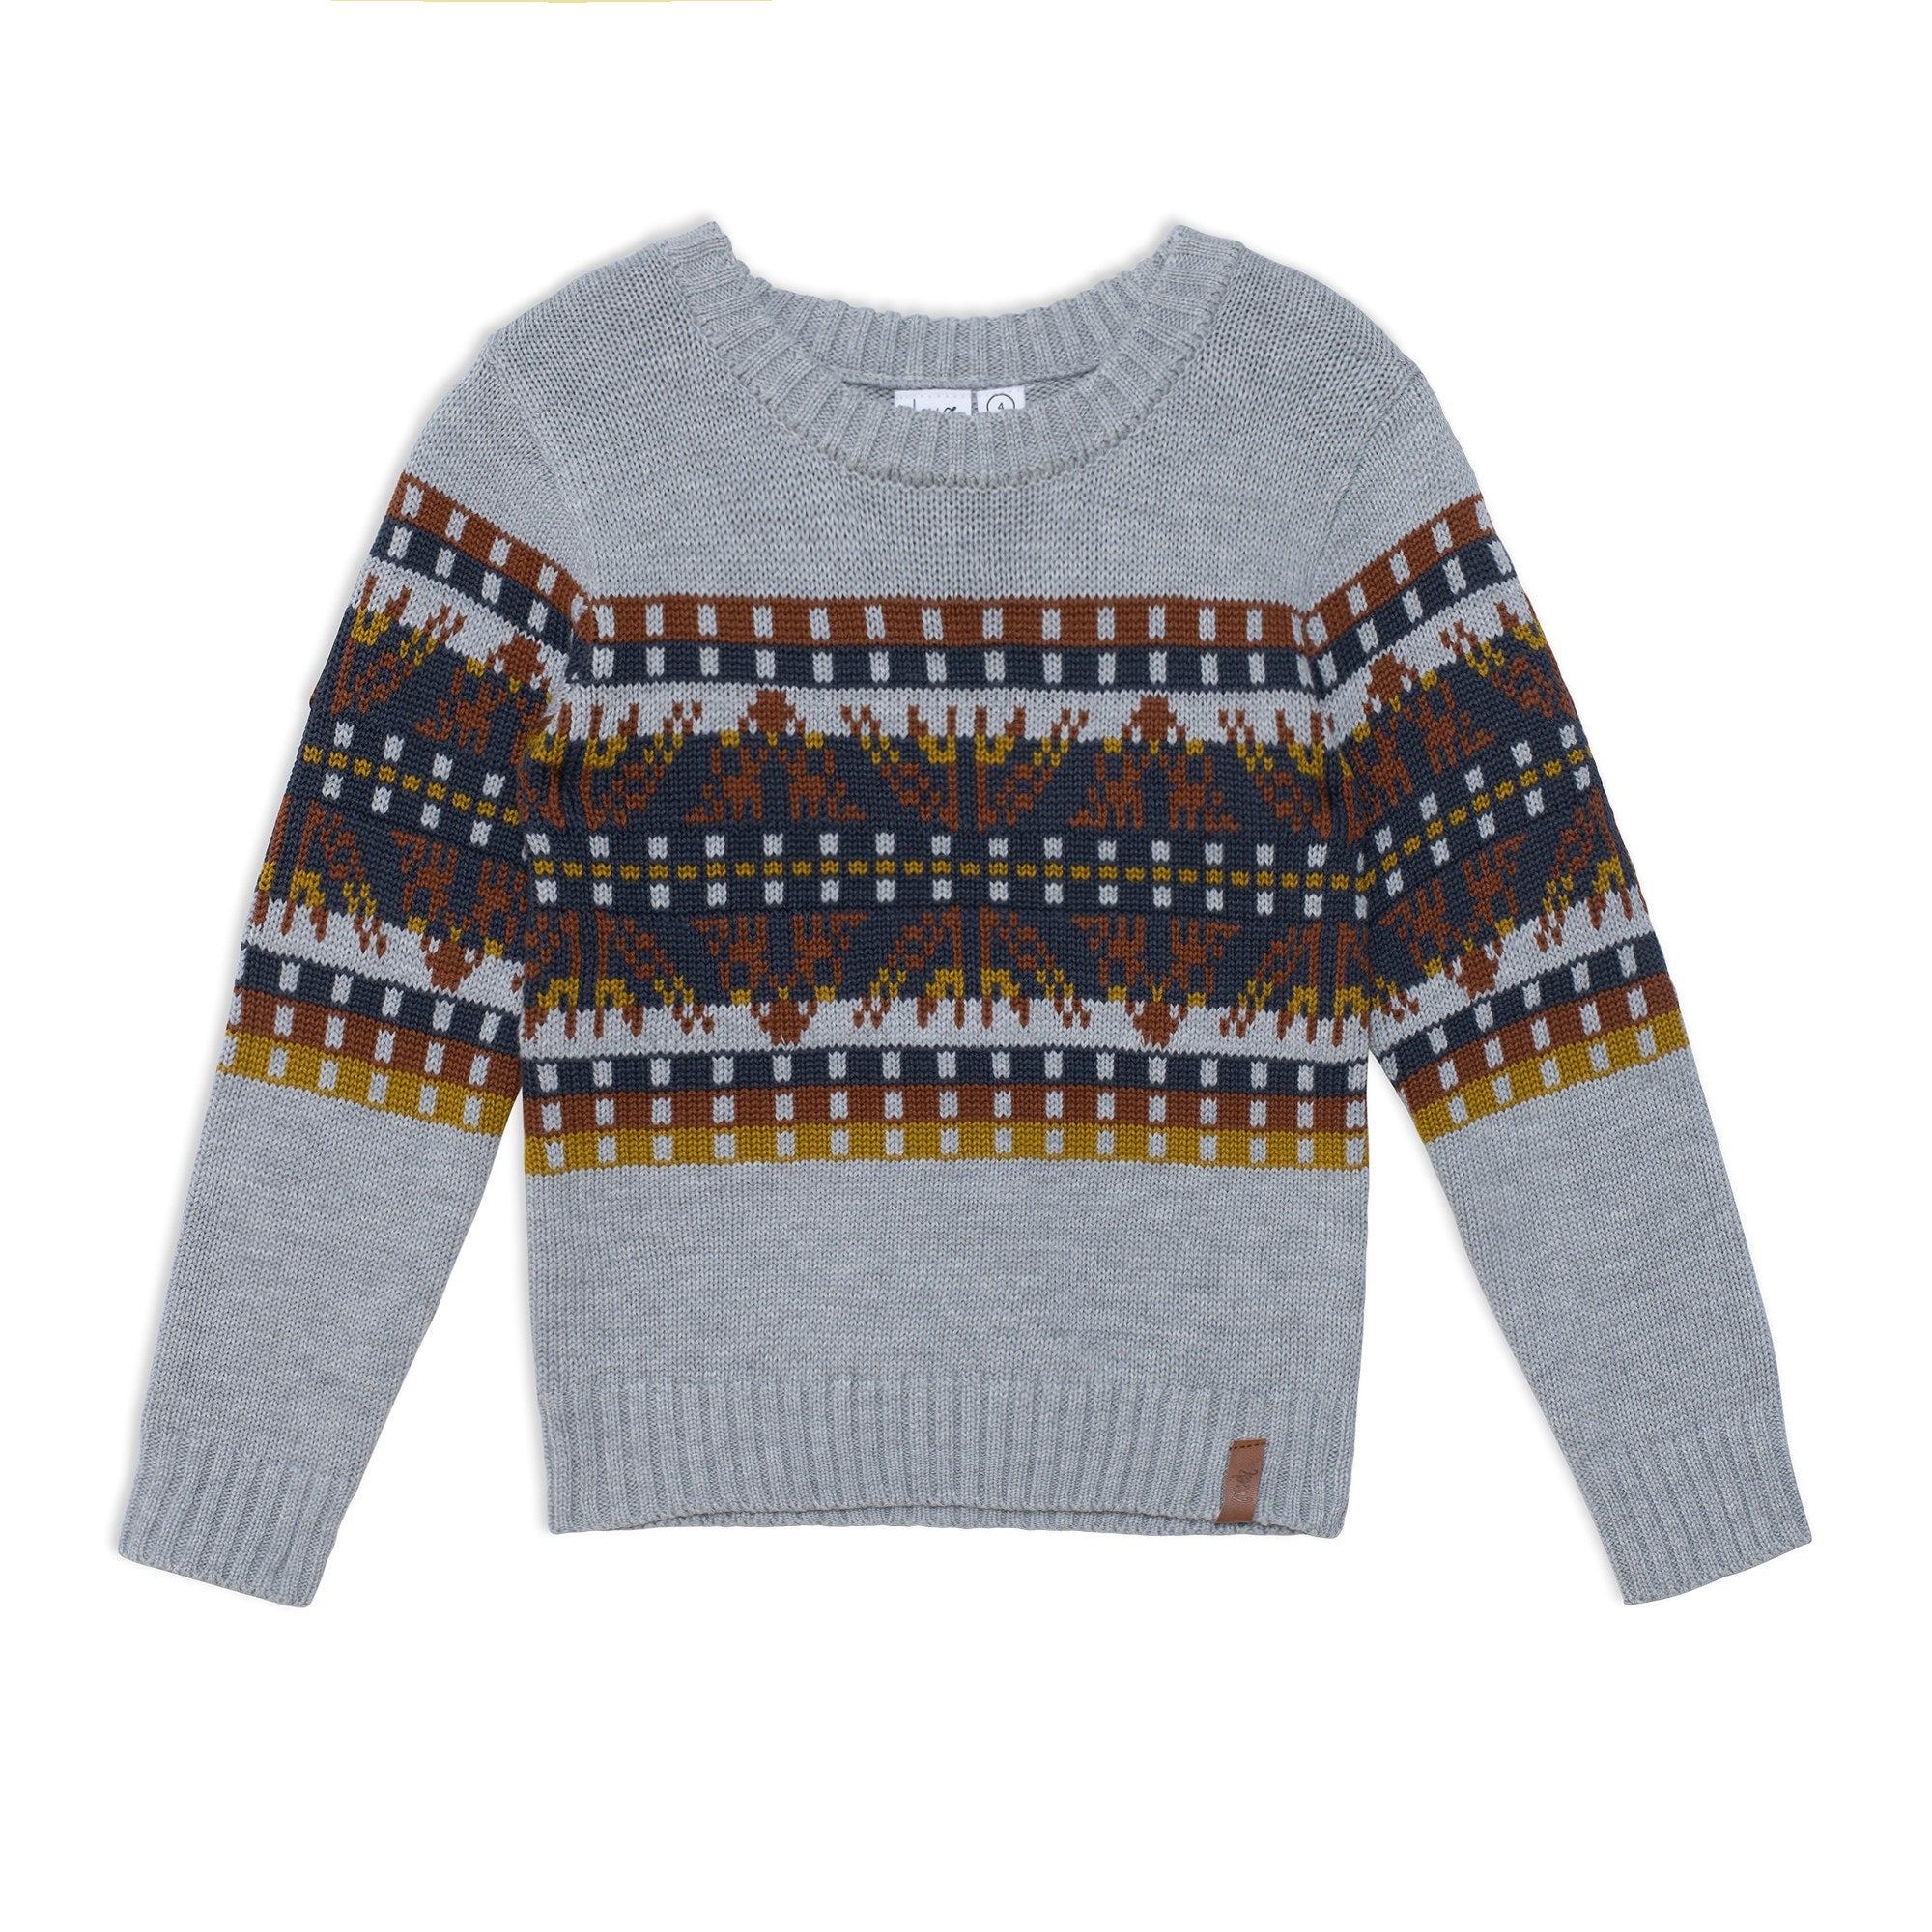 Jacquard Knitted Sweater Top Grey, Blue And Yellow